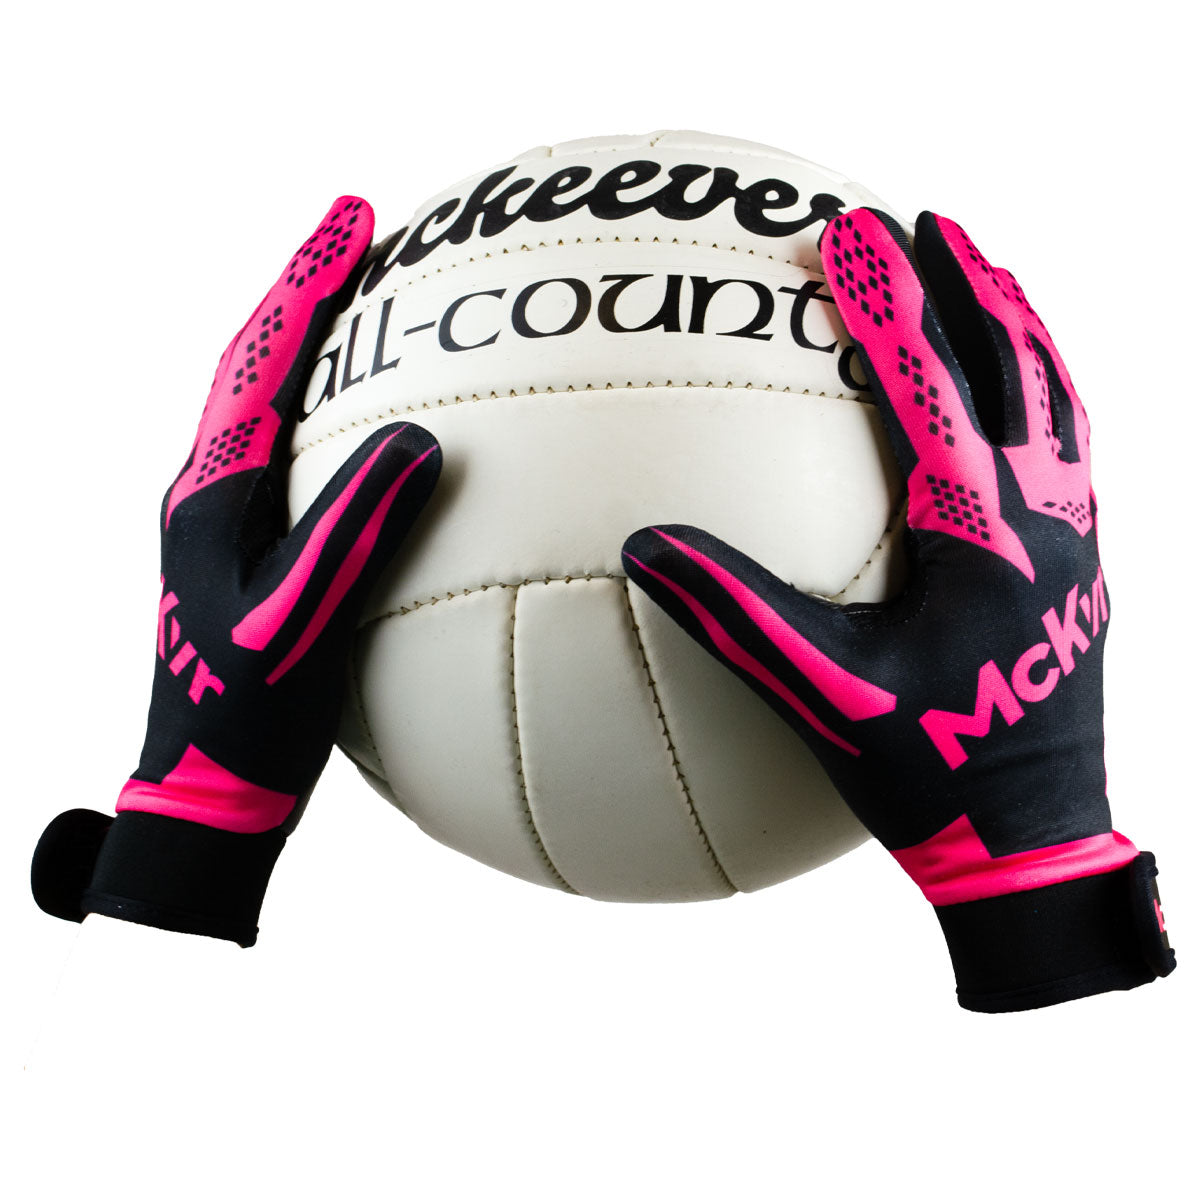 Mc Keever 2.0 Gaelic Gloves - Youth - Black/Pink